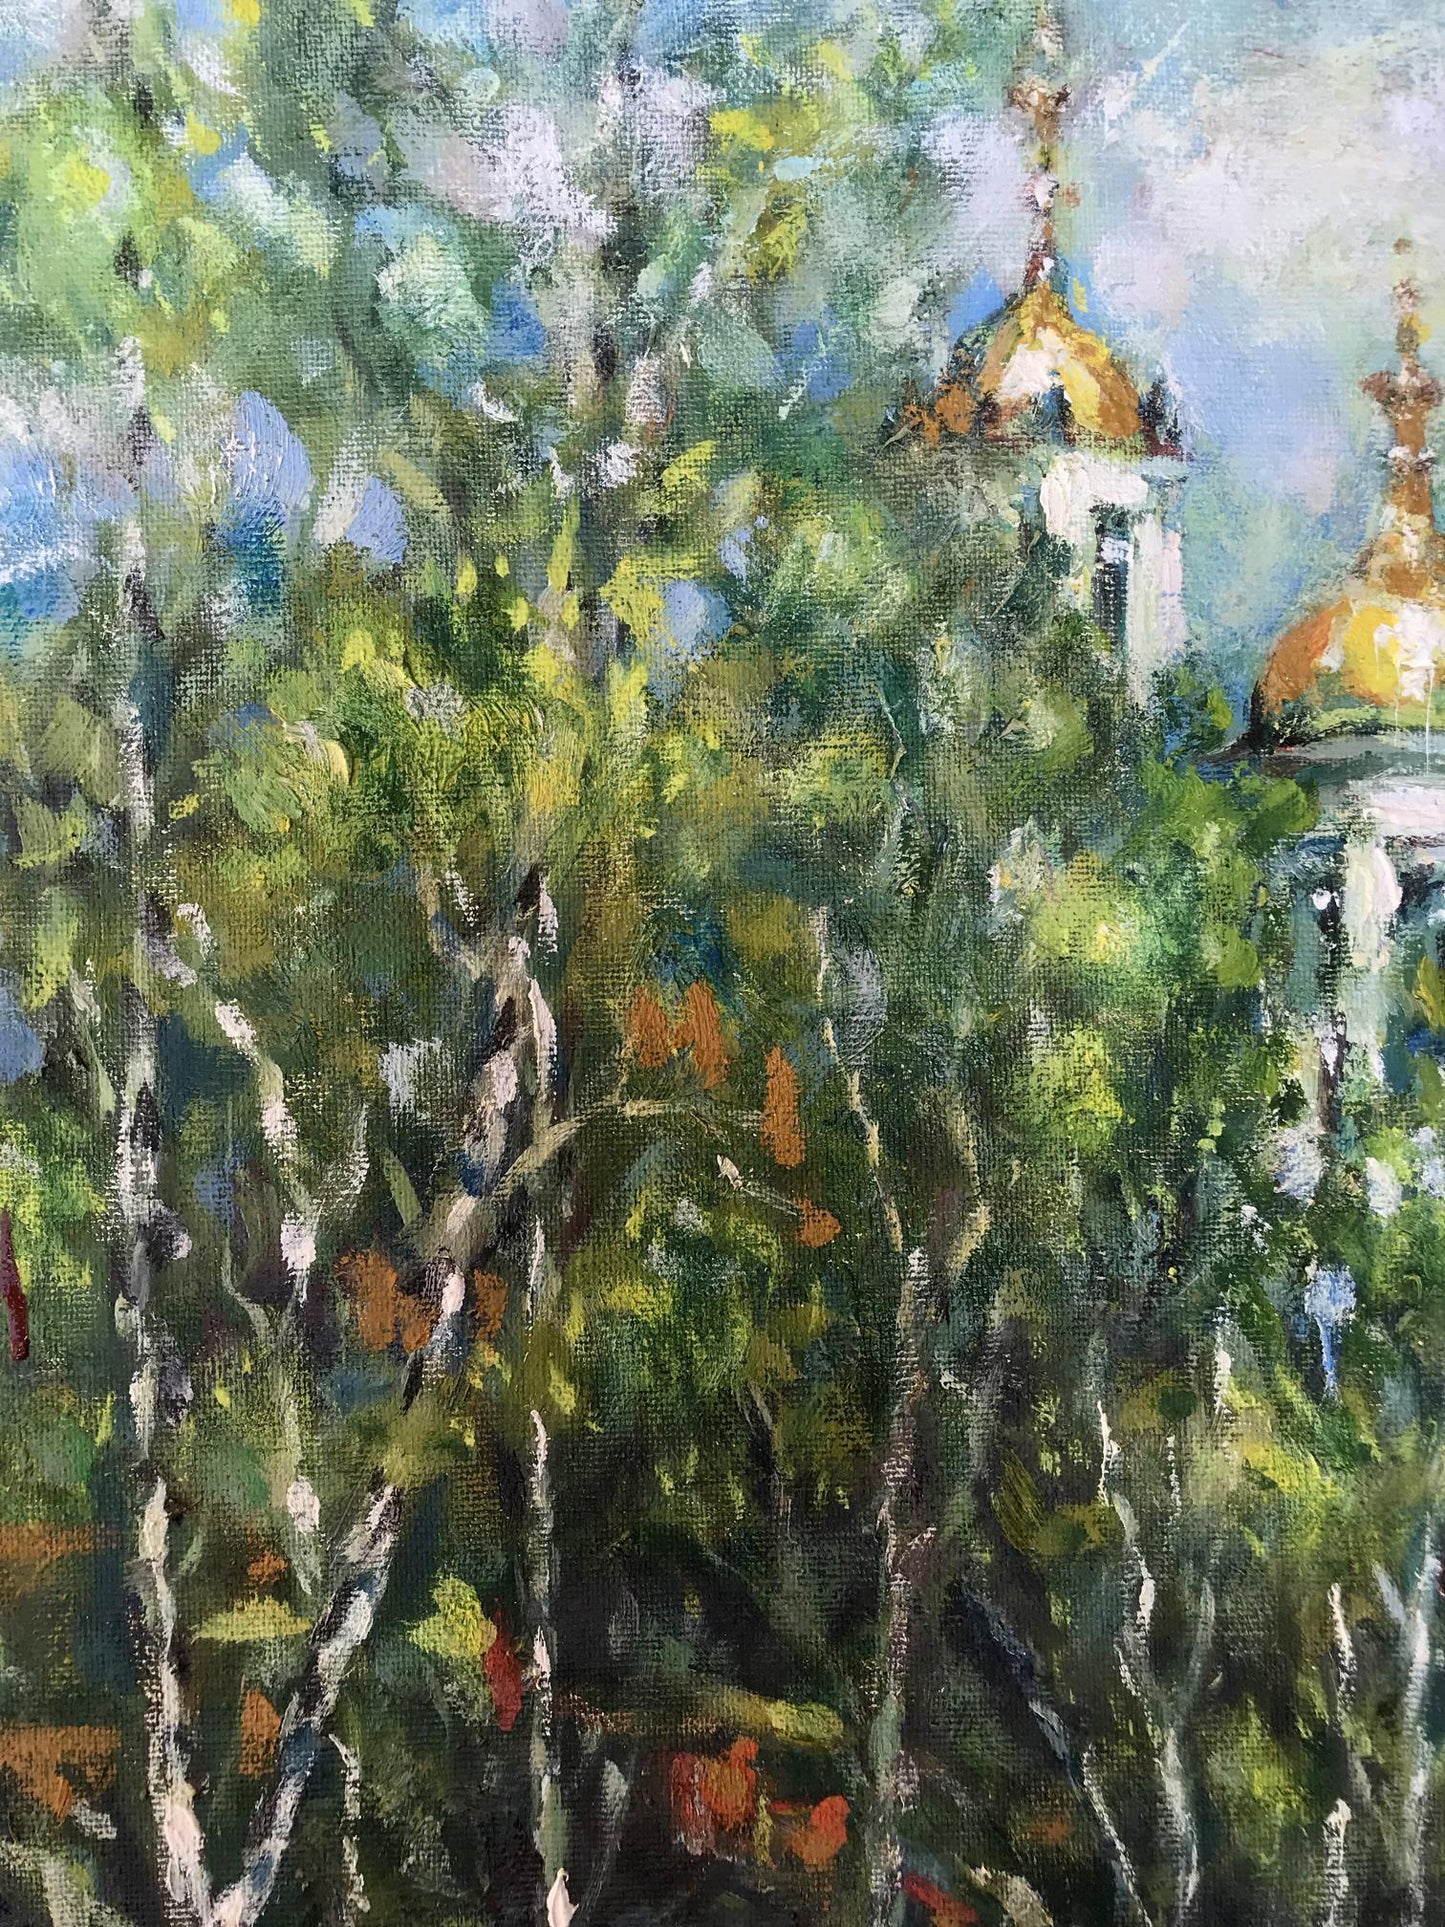 Sumy's birches take center stage in Ivan Leontyevich Shapoval's oil painting